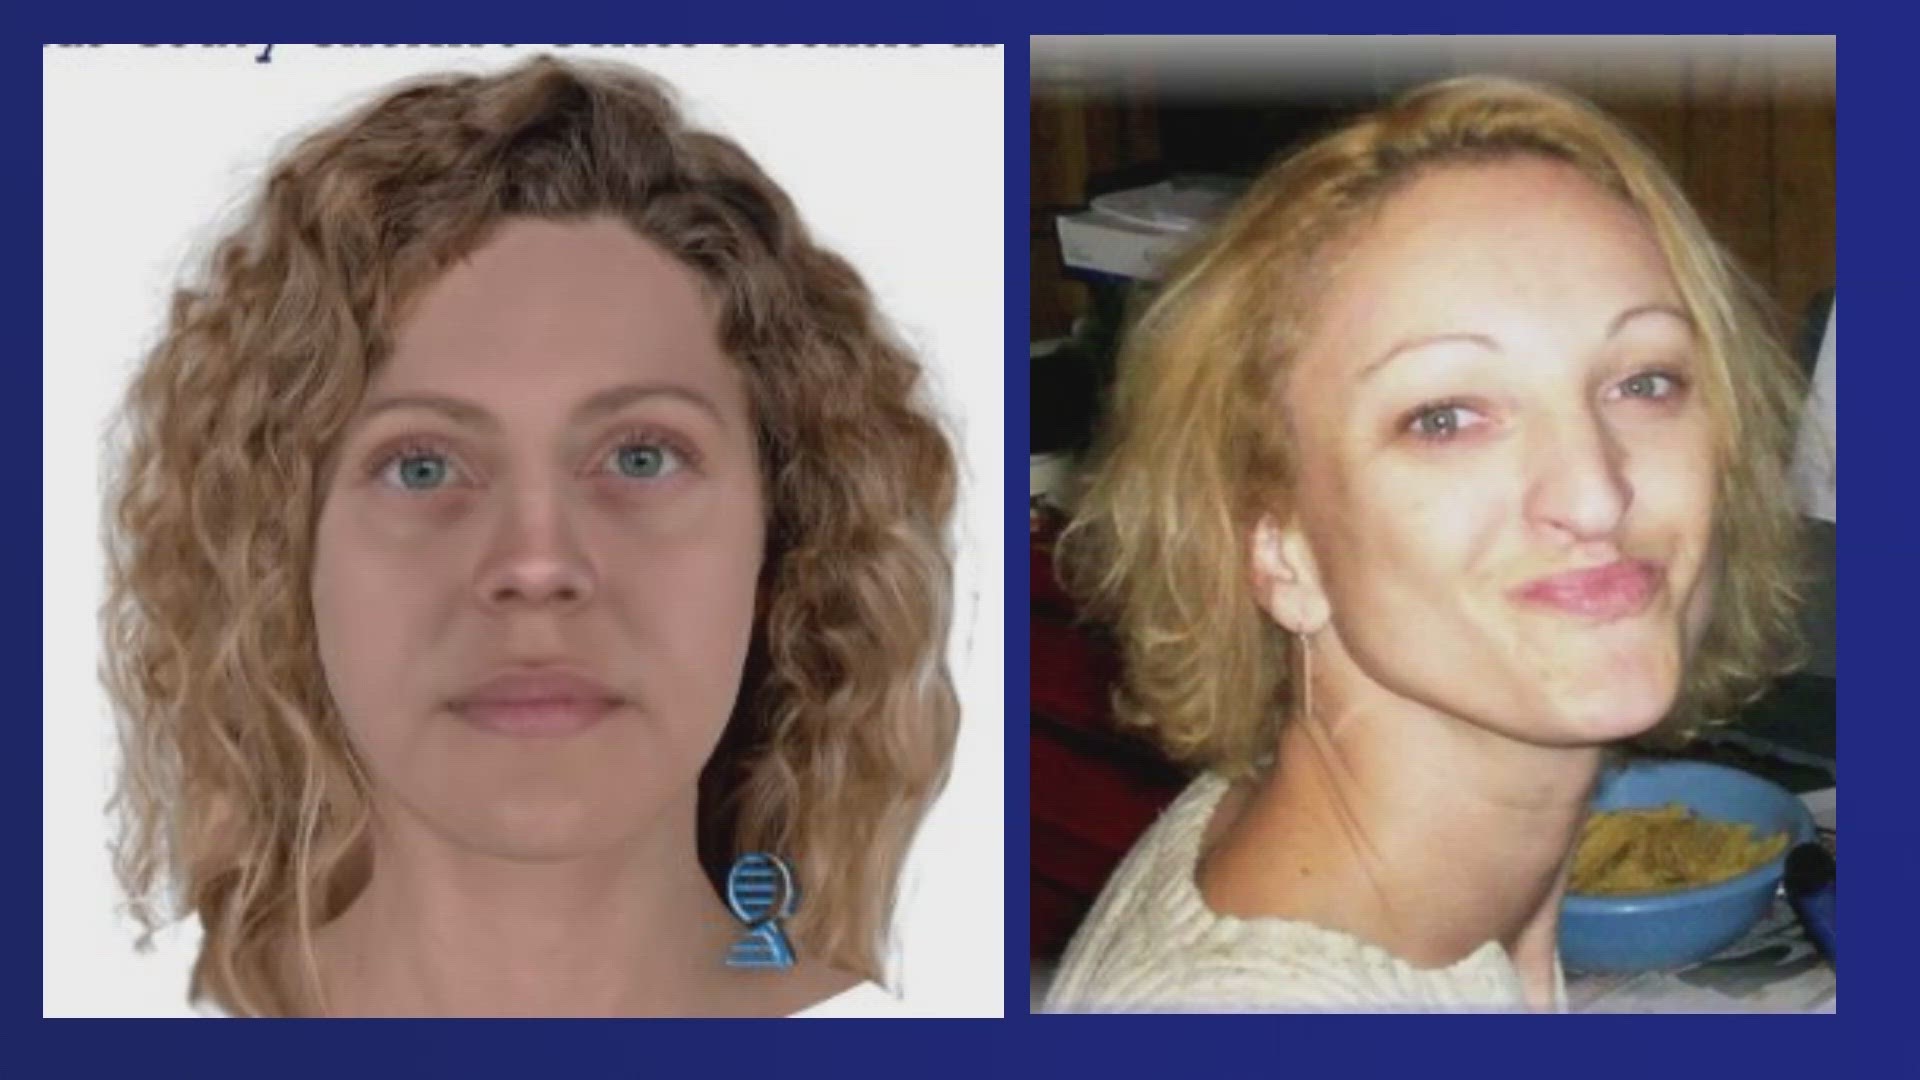 Remains found near Sweet Home, Oregon were identified as a missing woman from Washington state.